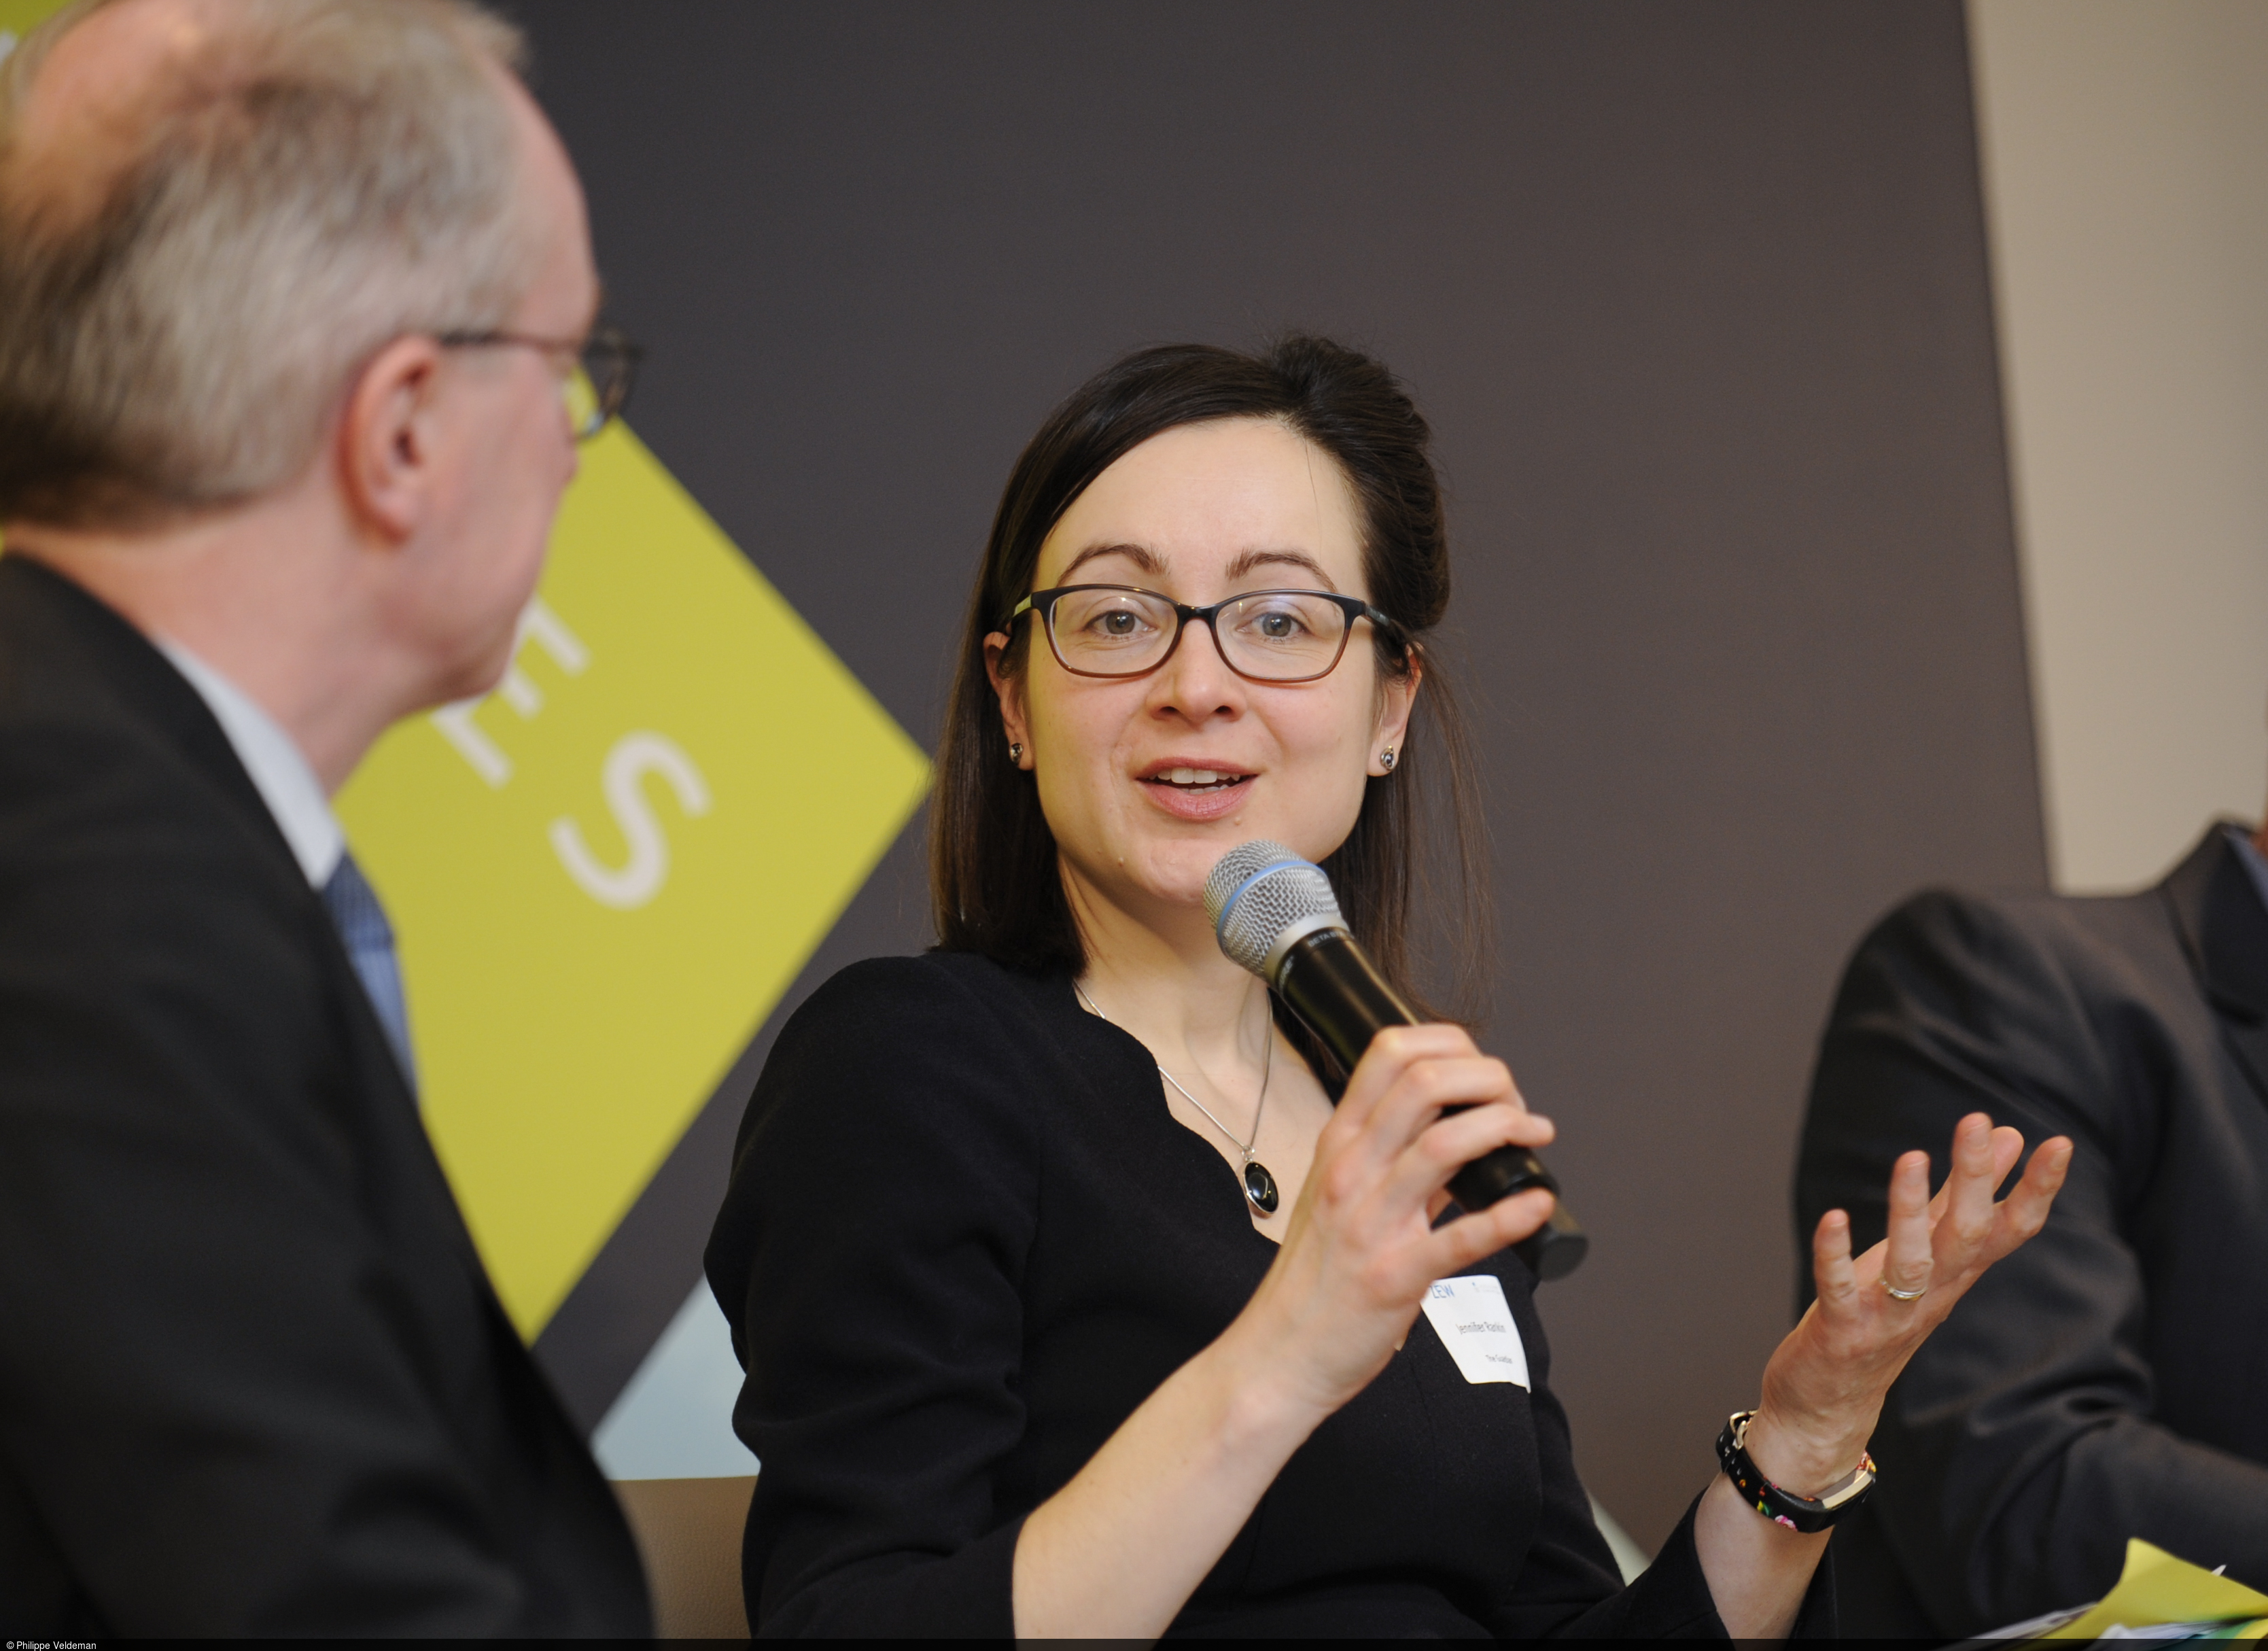 Jennifer Rankin, Brussels correspondent for The Guardian, moderated the debate at ZEW.